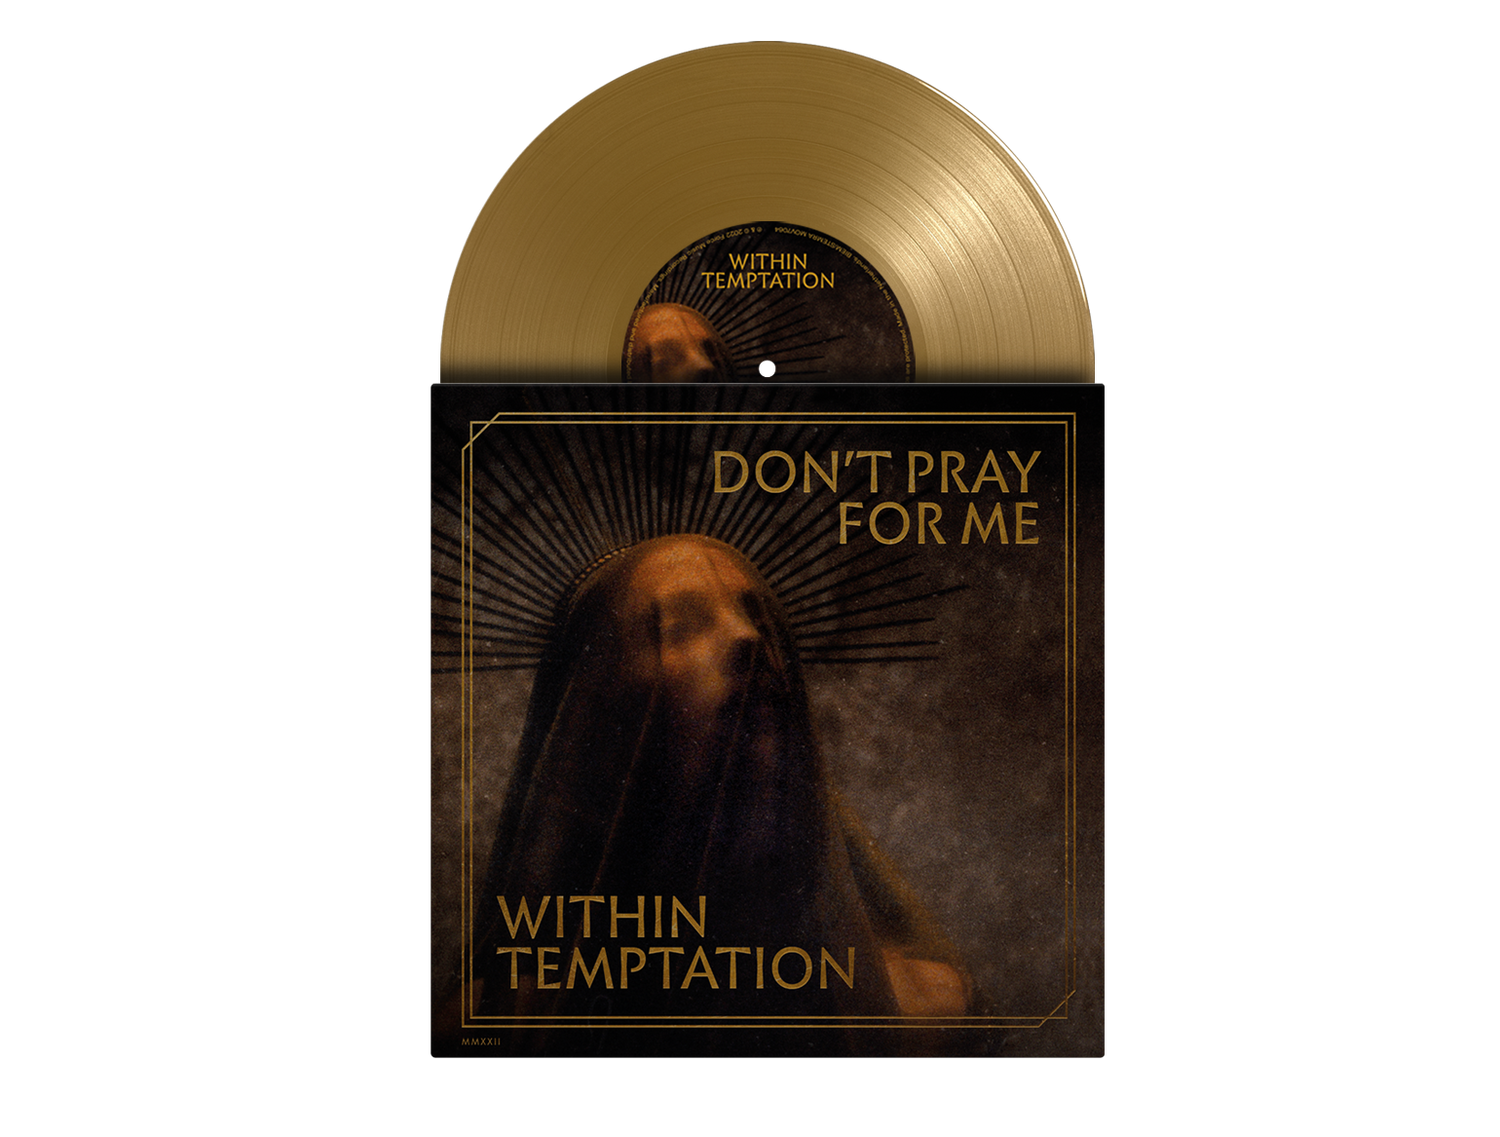 within-temptation-don-t-pray-for-me-d2c-exclusive